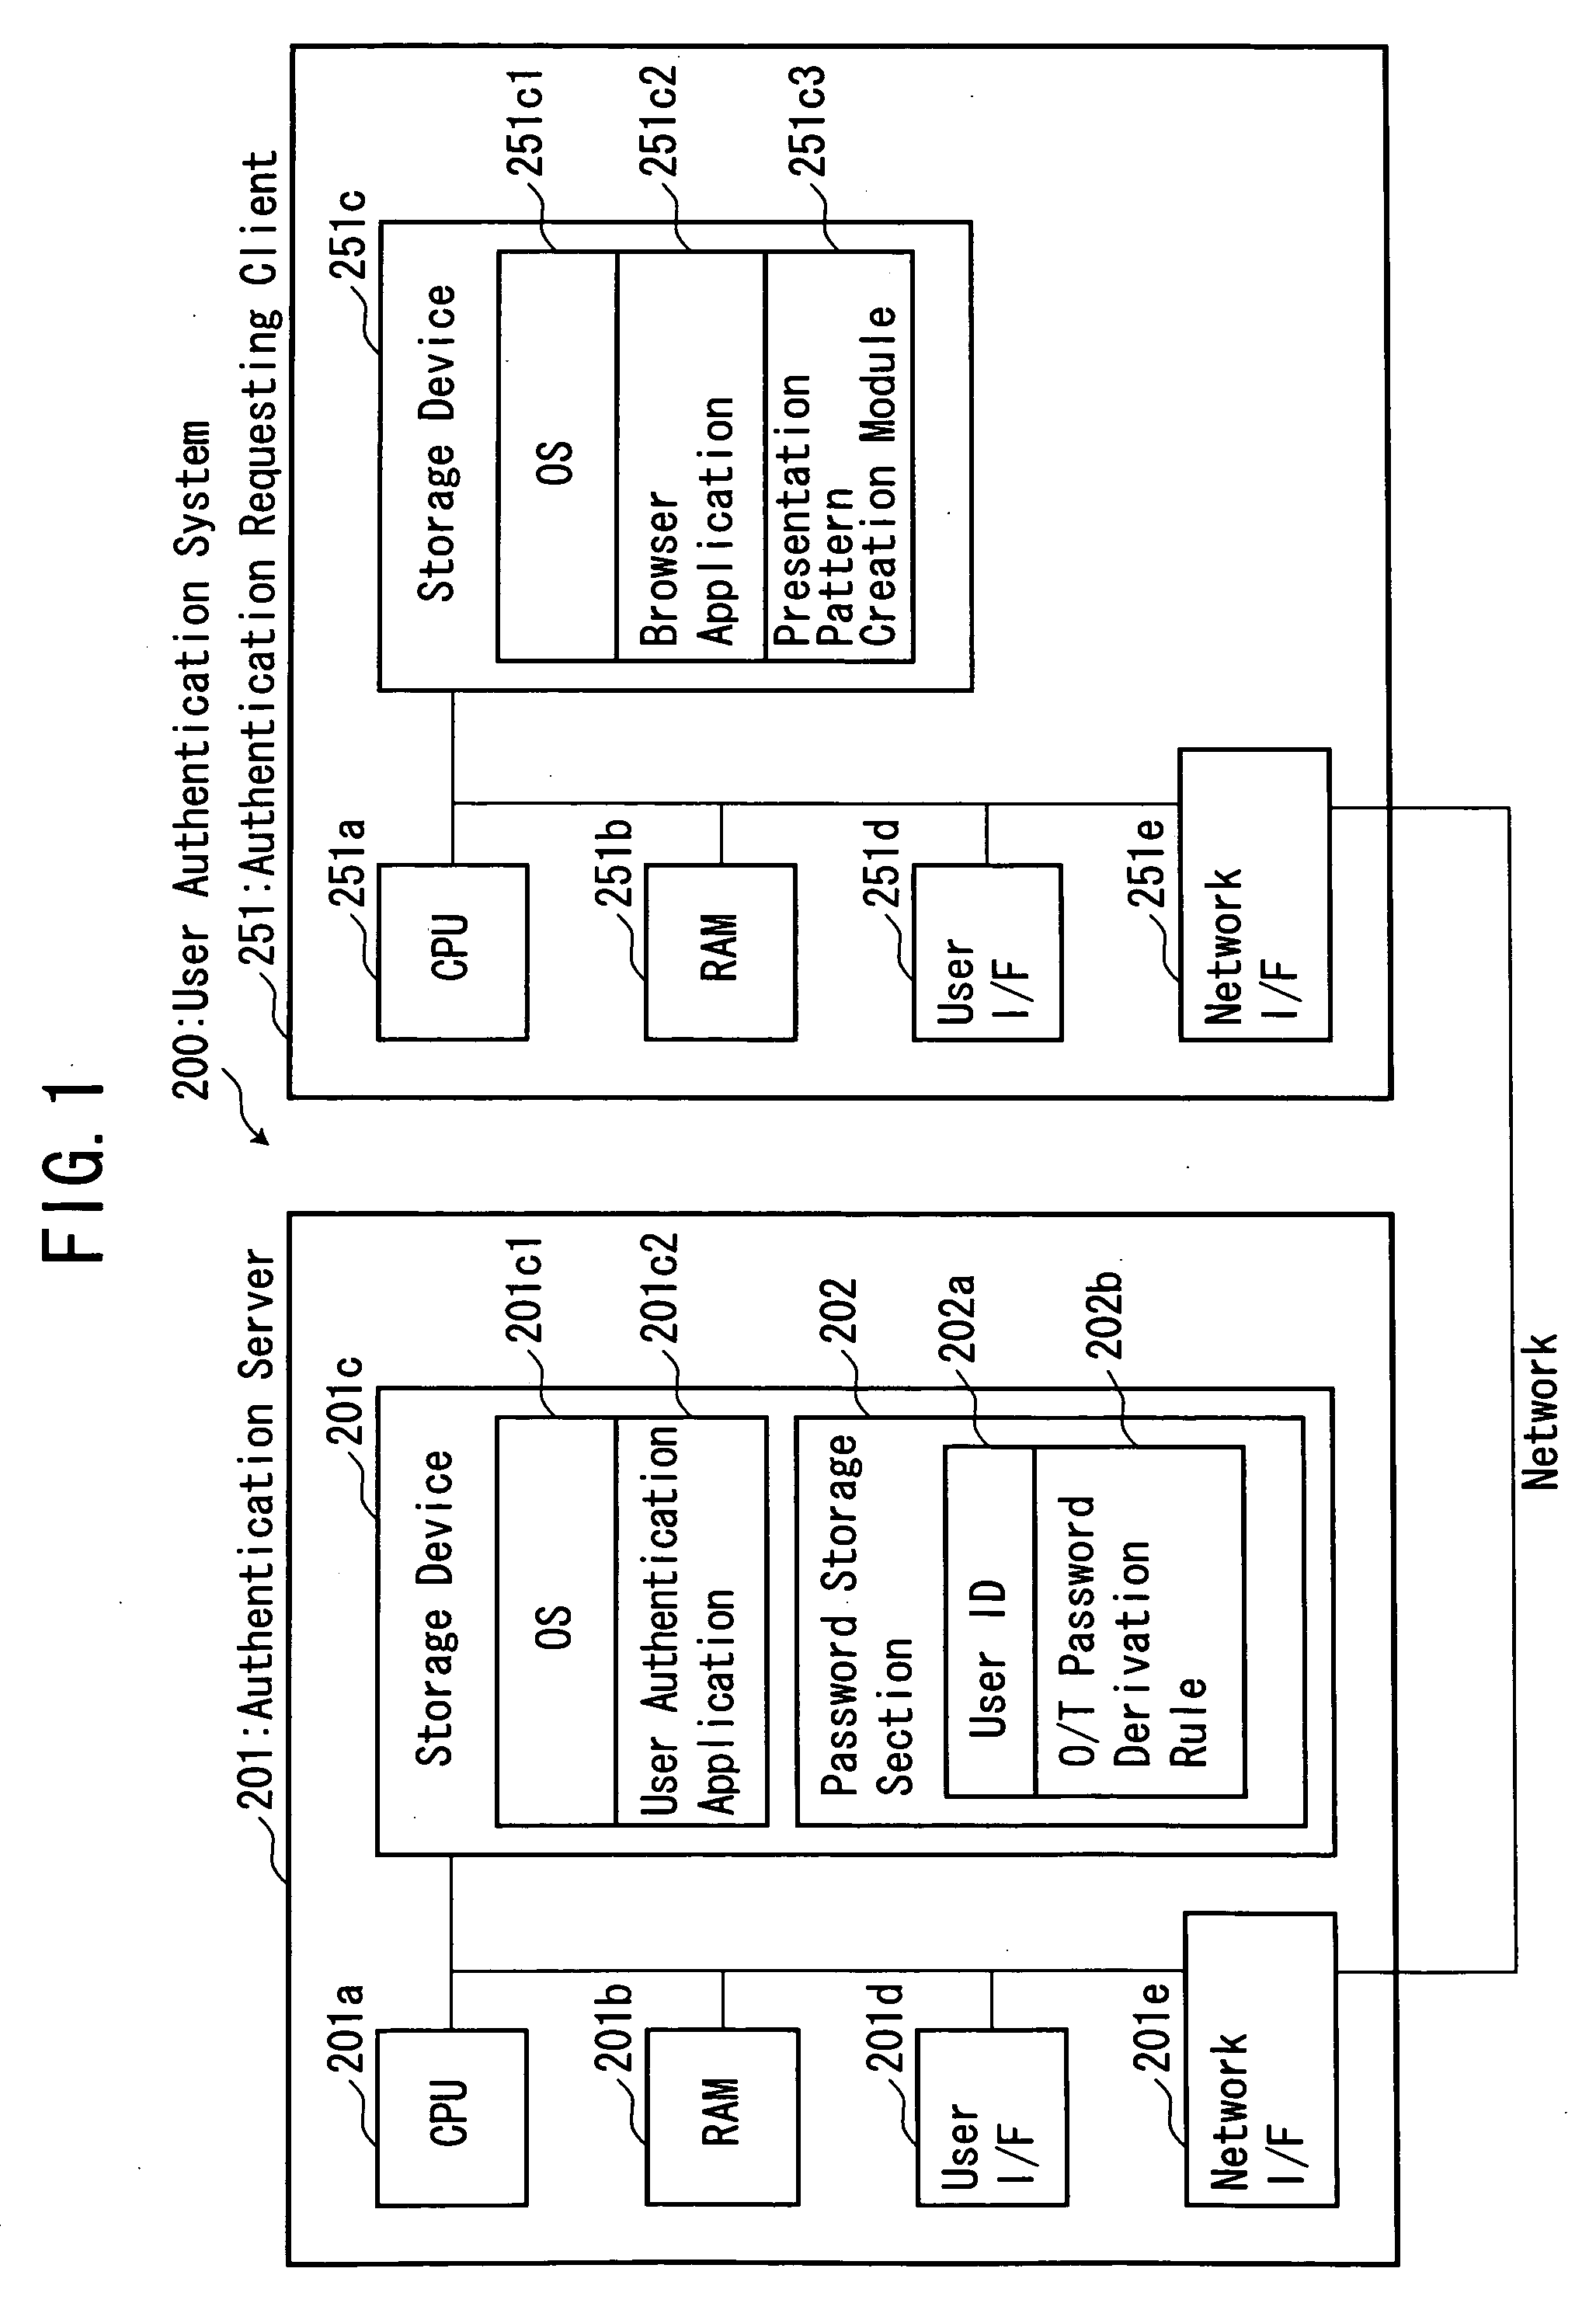 System and method for user authentication